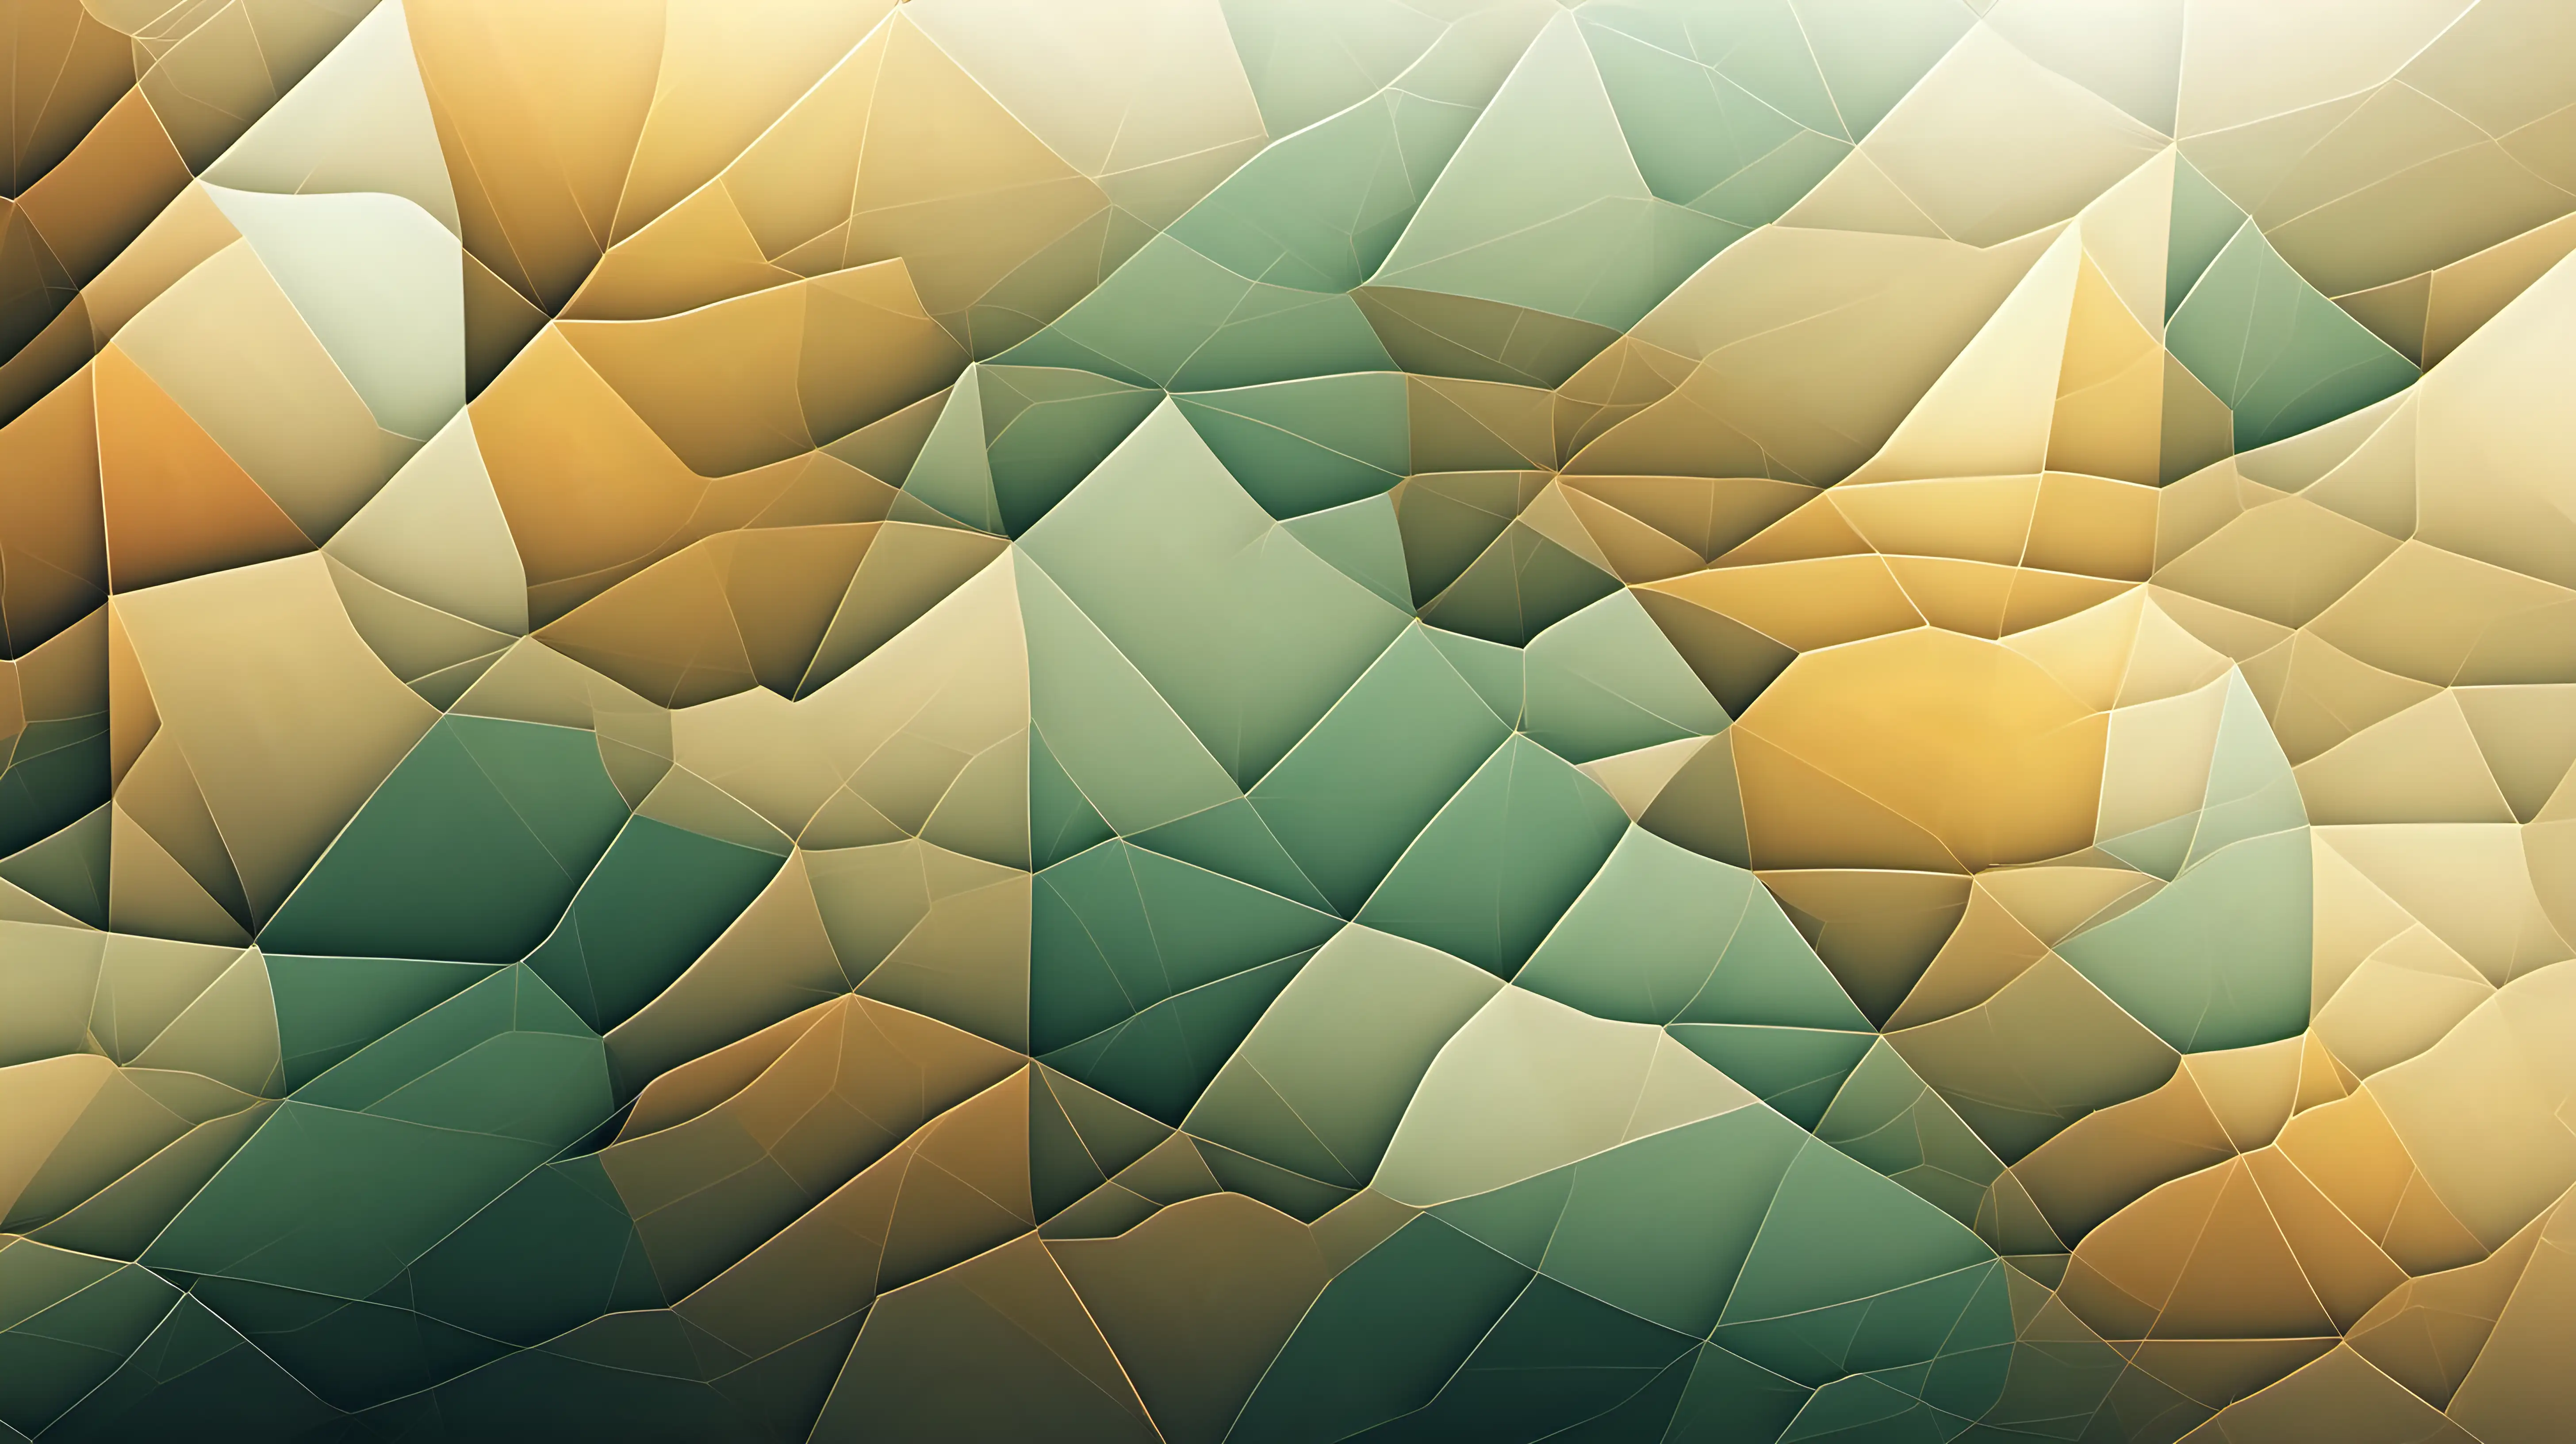 Translucent Geometric Shapes Abstract Background